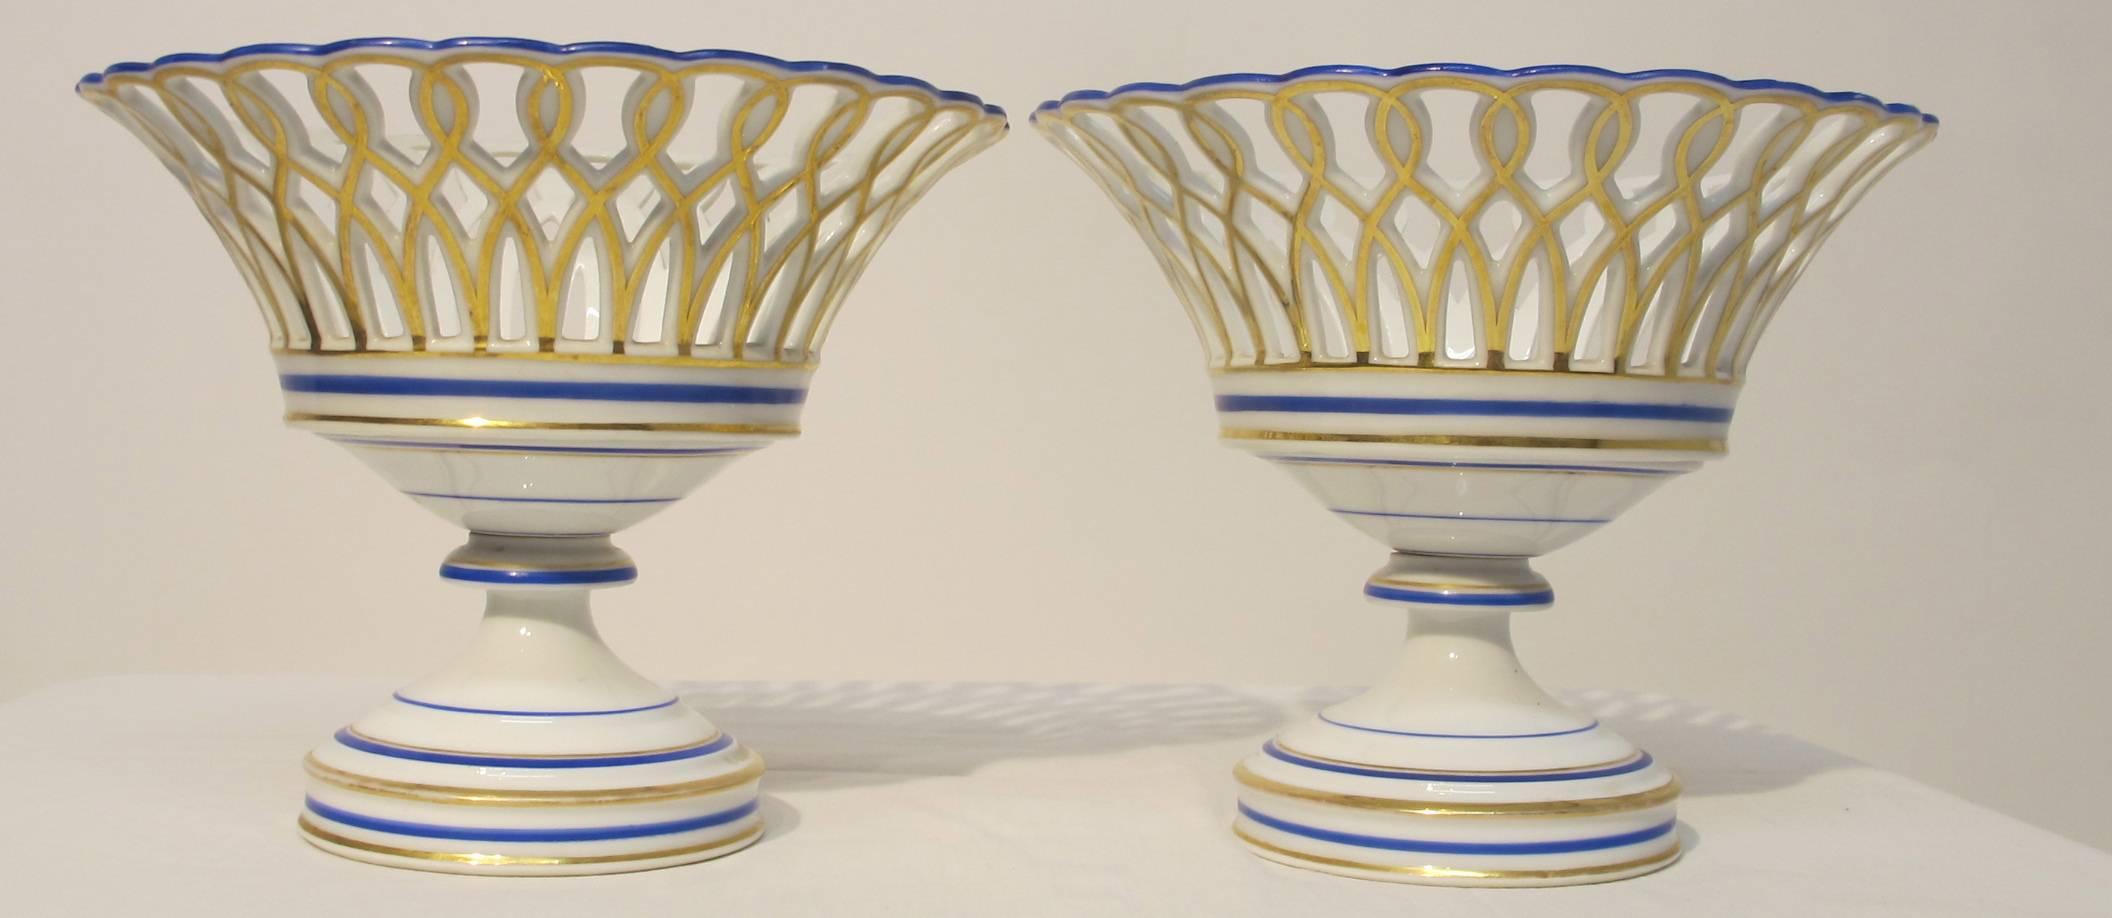  Old Paris porcelain reticulated baskets highlighted with gilt and blue banding standing on circular stepped bases, Paris Porcelain, French, circa 1860.